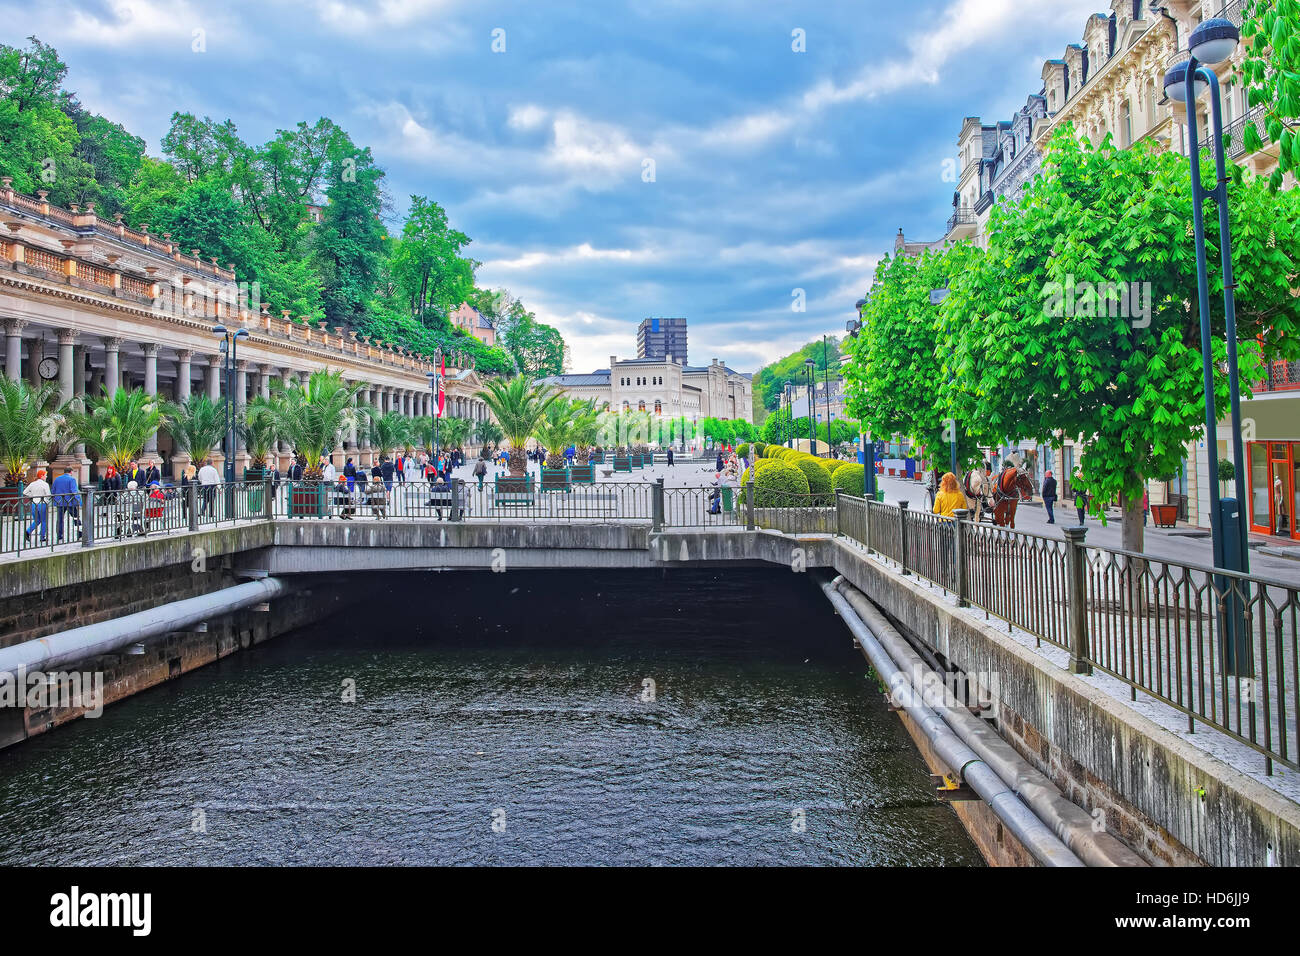 Karlovy vary, Czech republic - May 5, 2014: People at the Mill Colonnade in Karlovy Vary, Czech republic Stock Photo